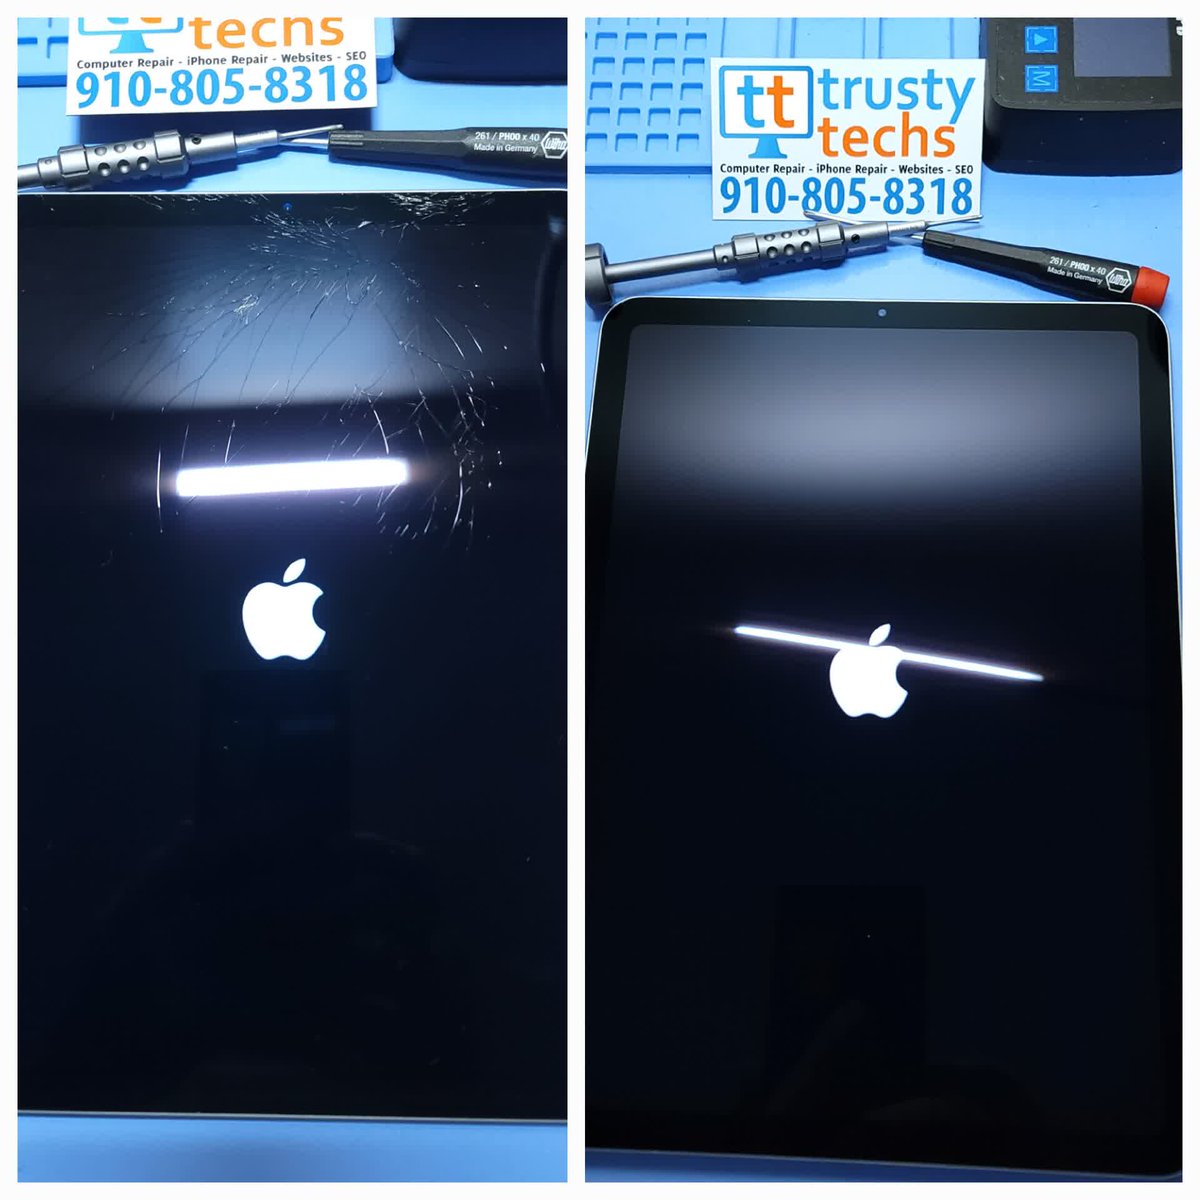 Premium #iPadScreenRepair with convenient pickup and delivery service at your location for locals and tourists of the #HoldenBeach #OceanIsleBeach and #SunsetBeach areas of #NorthCarolina